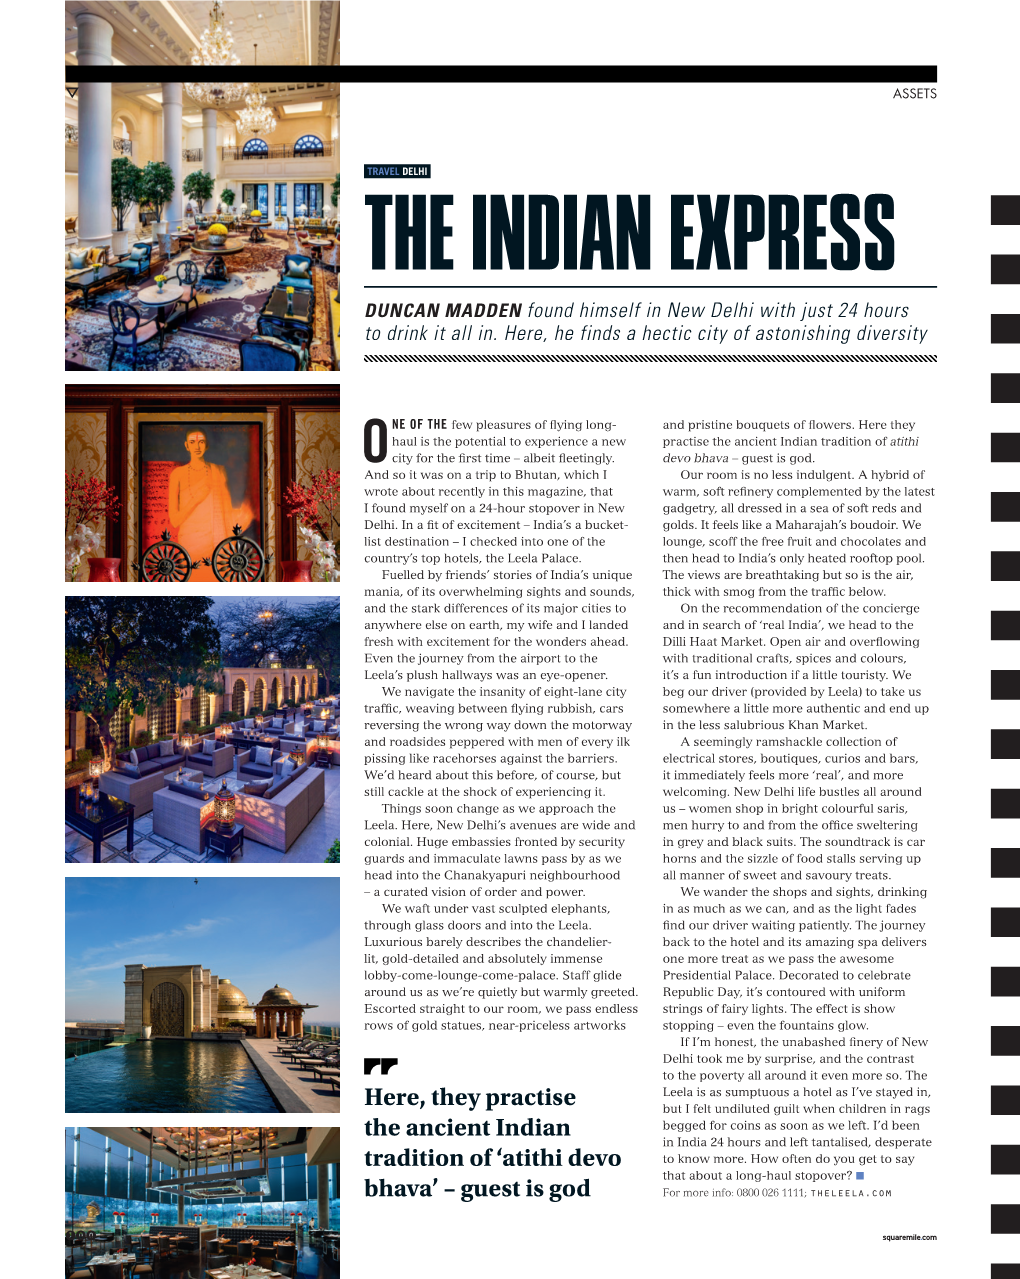 THE INDIAN EXPRESS DUNCAN MADDEN Found Himself in New Delhi with Just 24 Hours to Drink It All In